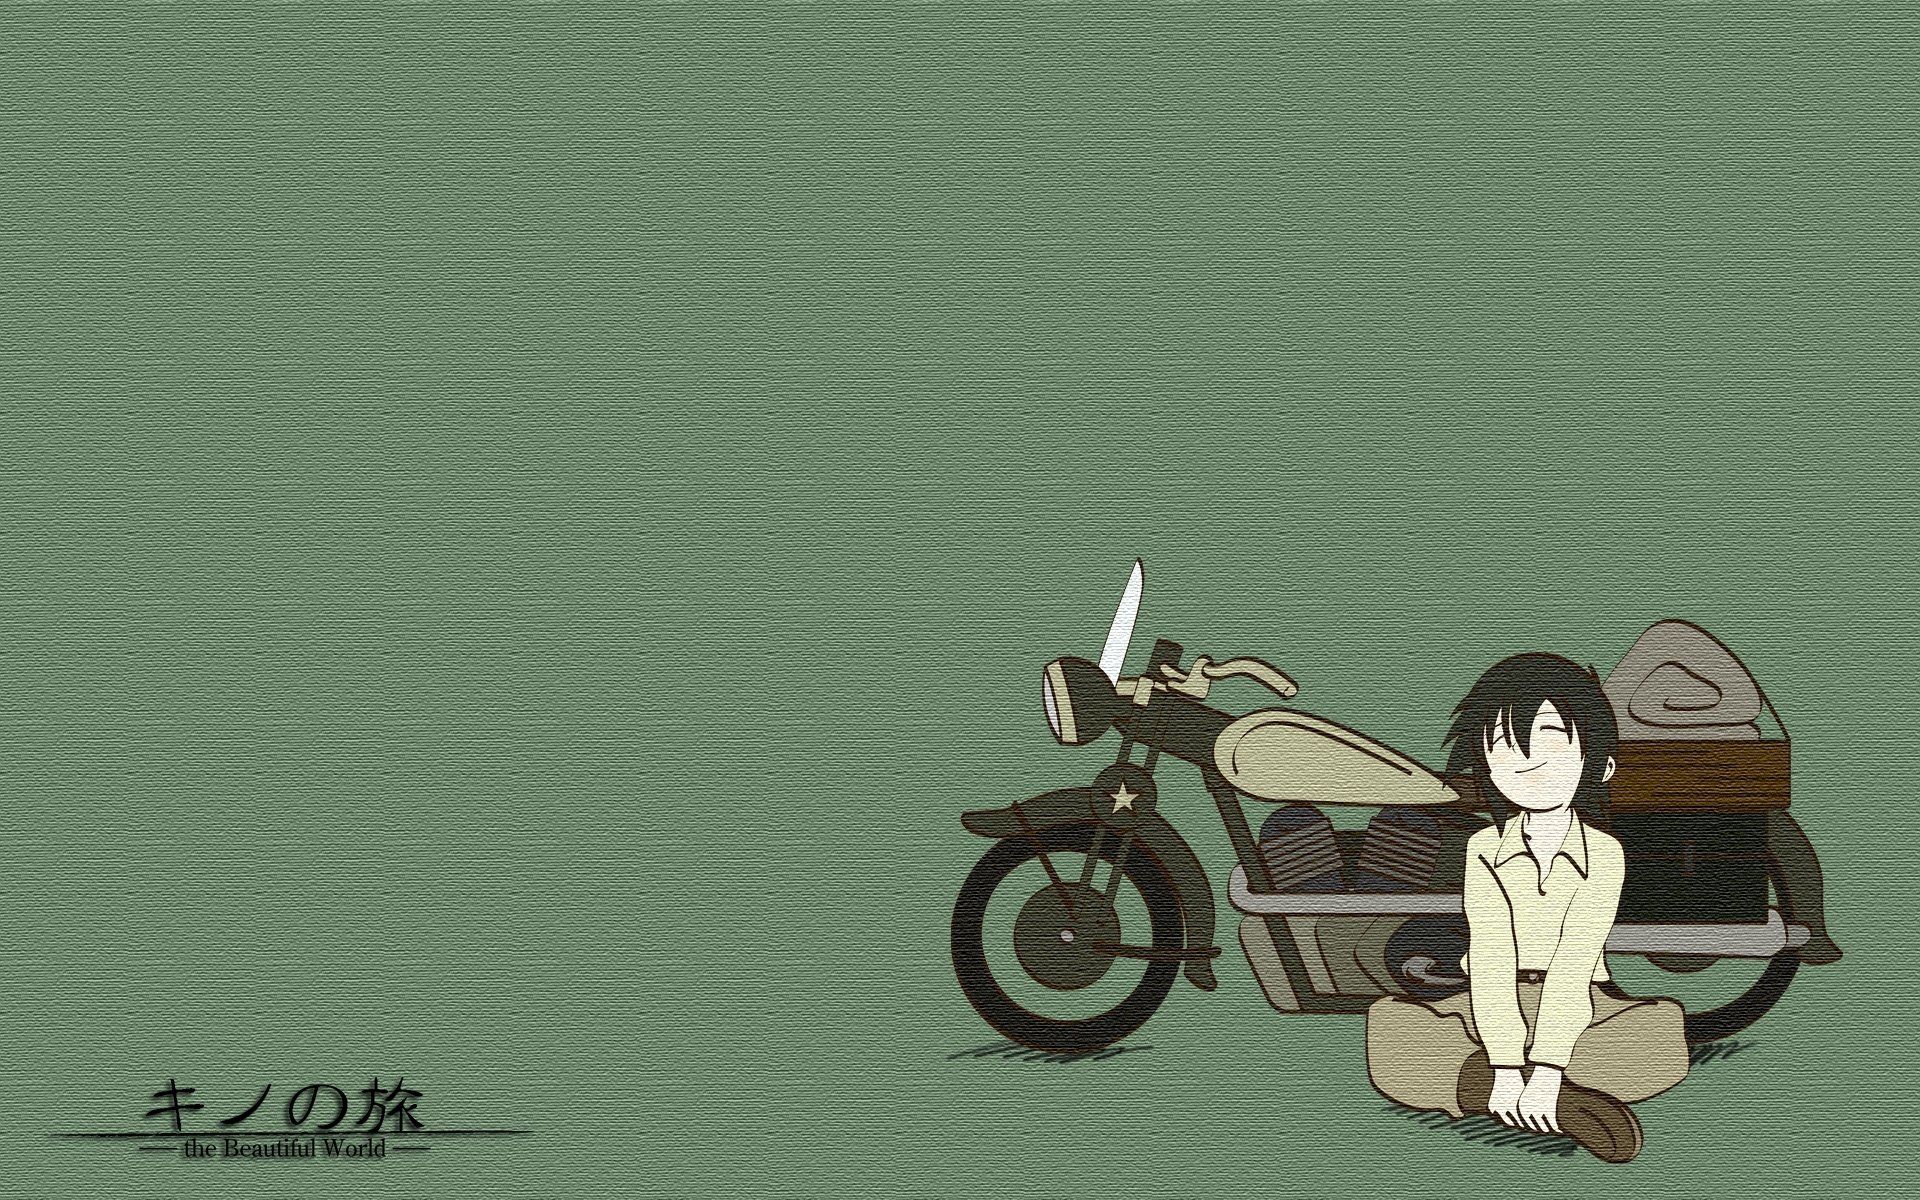 Kino's Journey HD Wallpaper and Background Image